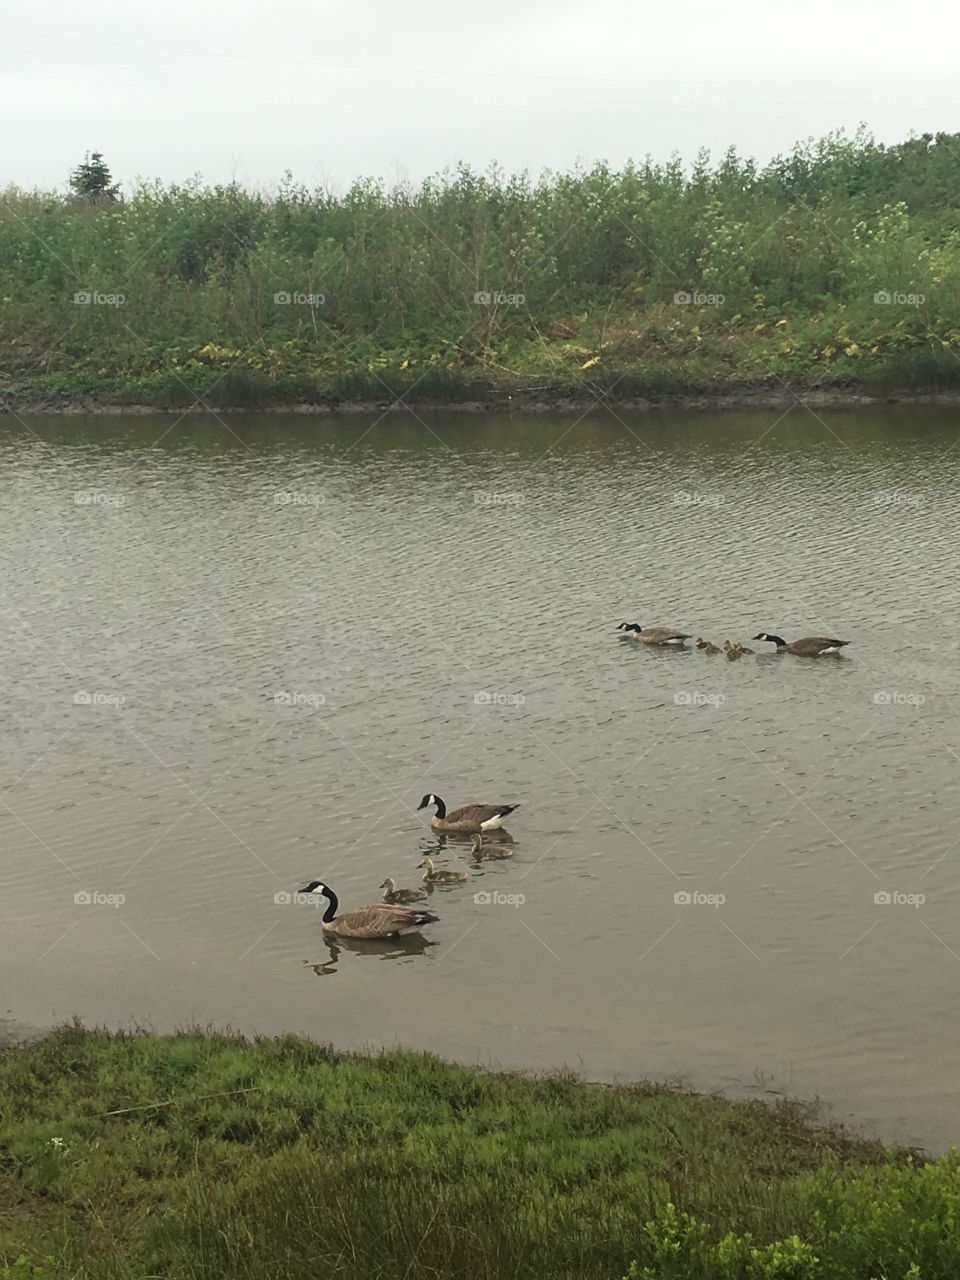 A family of geese at the marsh